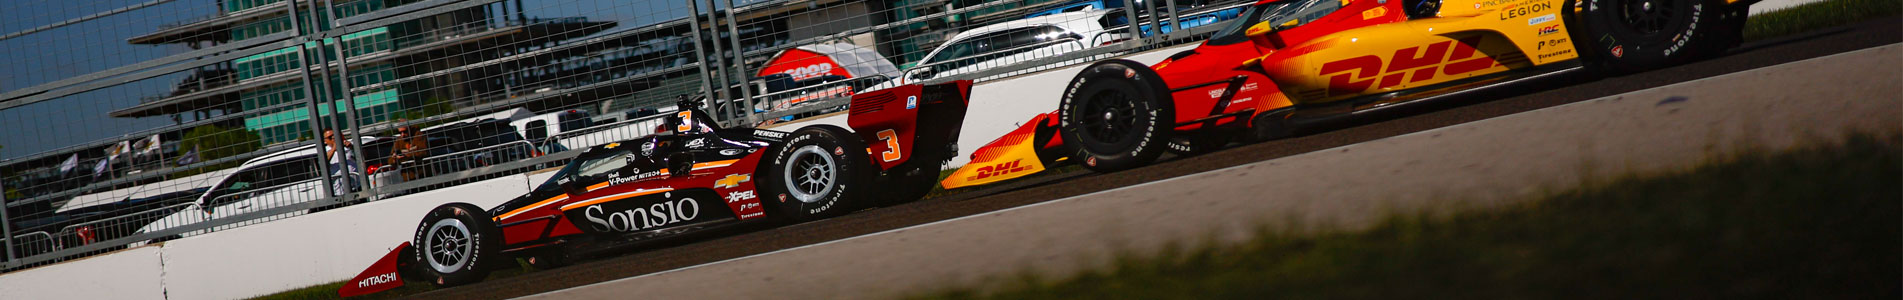 Scott McLaughlin and Alex Palou on track at Indianapolis Motor Speedway with the Pagoda in the background